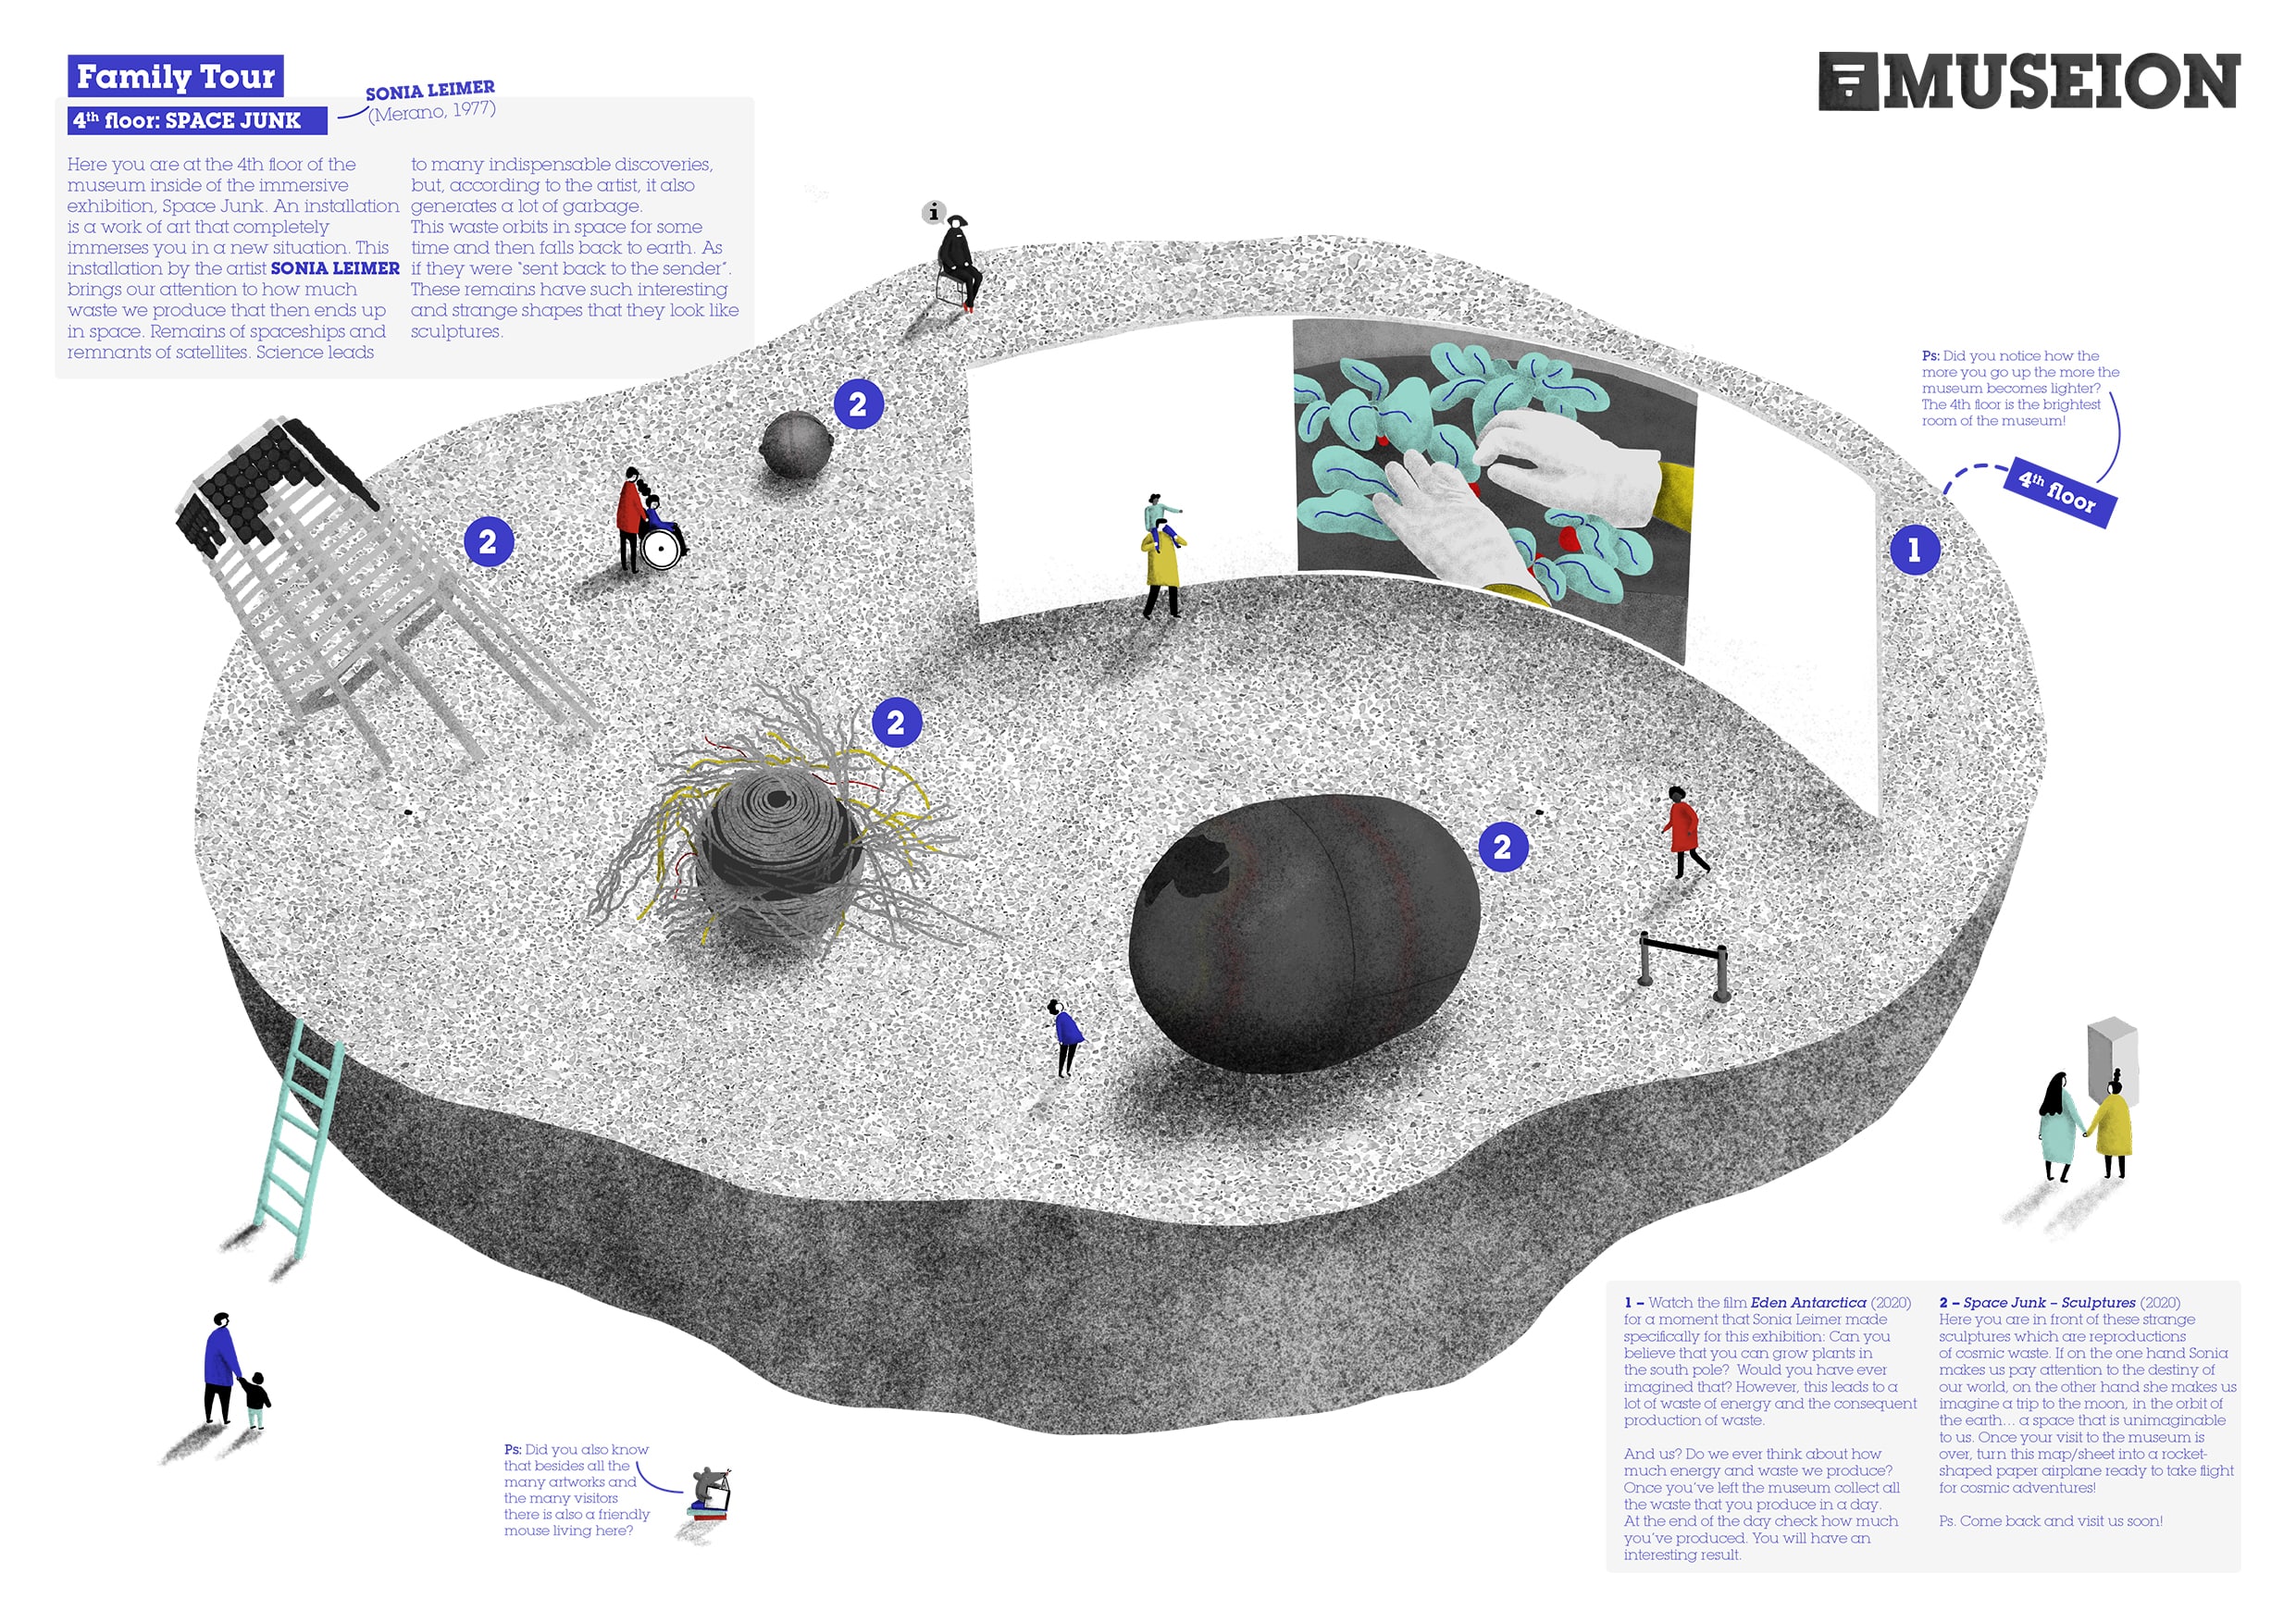 projects/-20-Museion-Family-Tour-Map/images/01.jpg